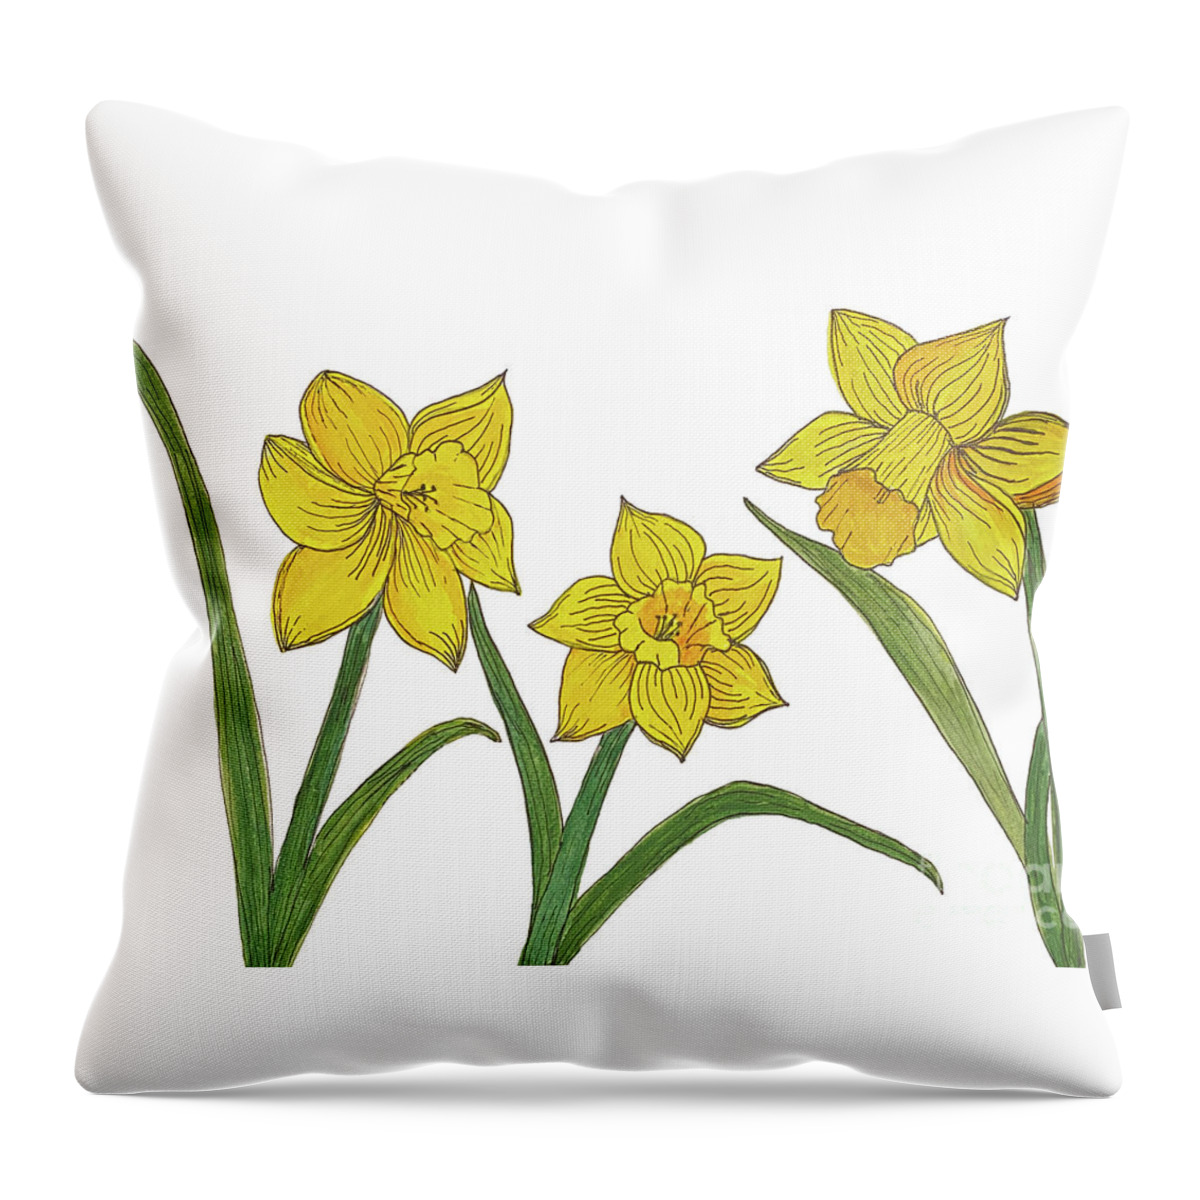 Daffodils Throw Pillow featuring the mixed media Daffodils by Lisa Neuman